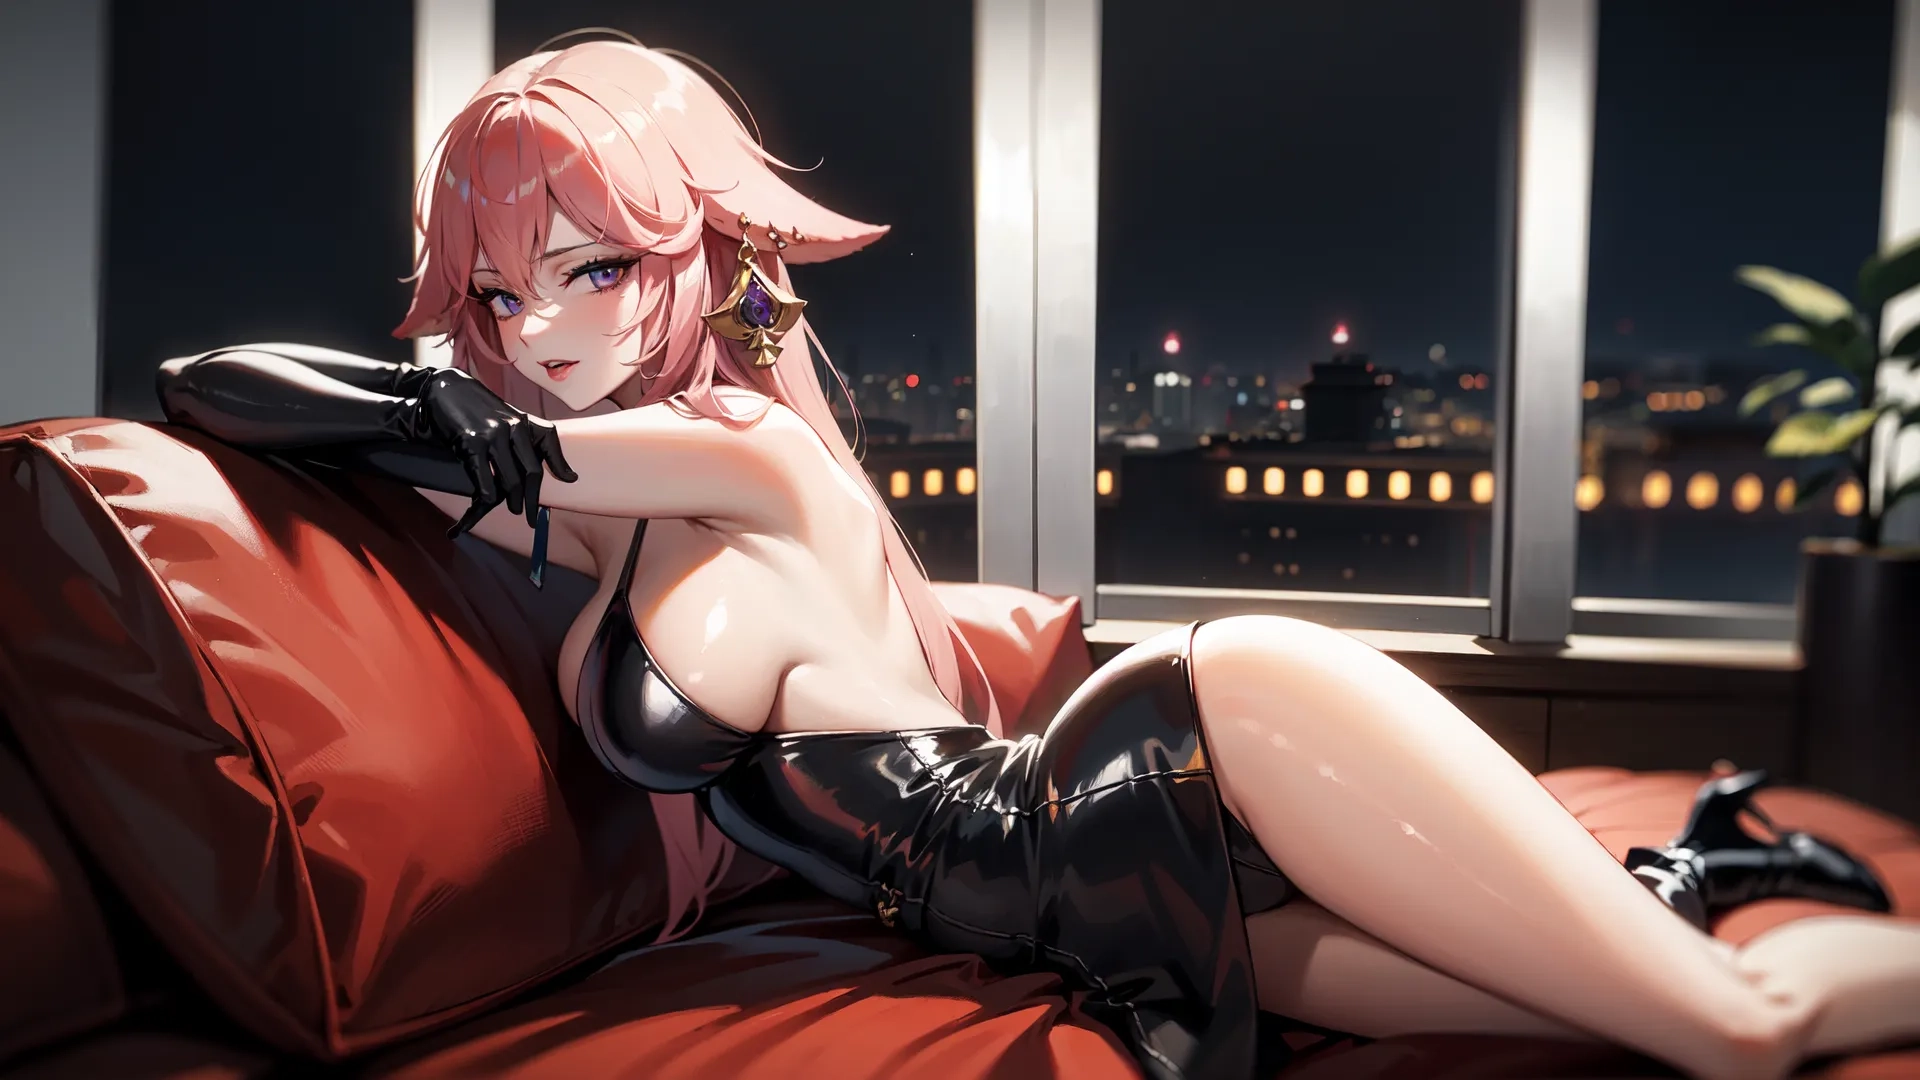 anime character with hair in top and skirt laying on arm chair at window sill next to floor and plant with city in distance across window screen
